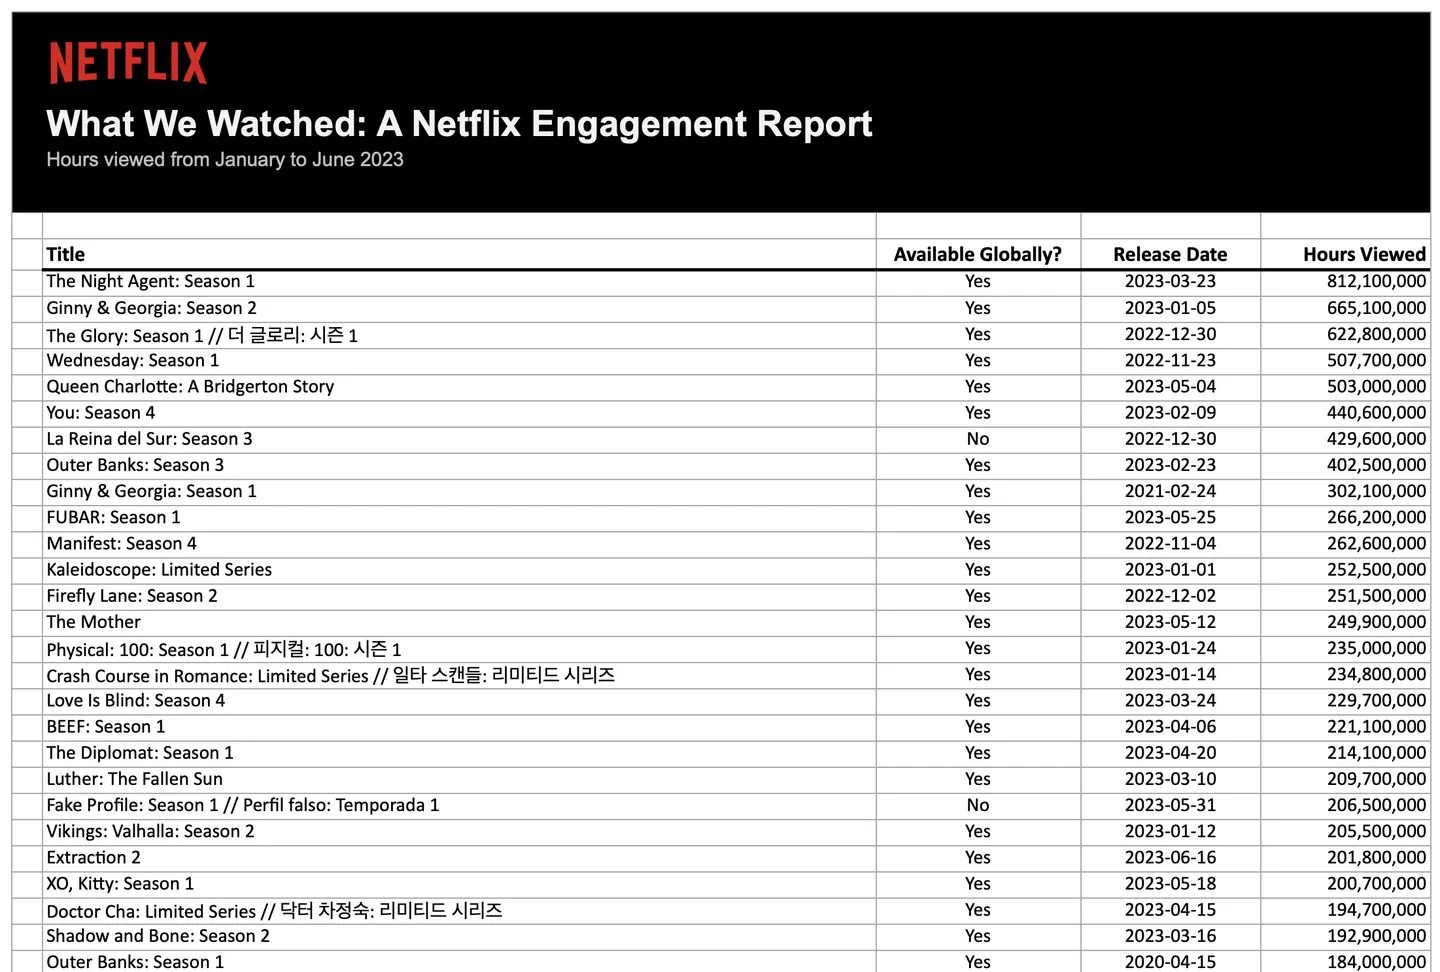 How to get the Full List of Netflix Viewing Data - Netflix Releases Viewing Data.